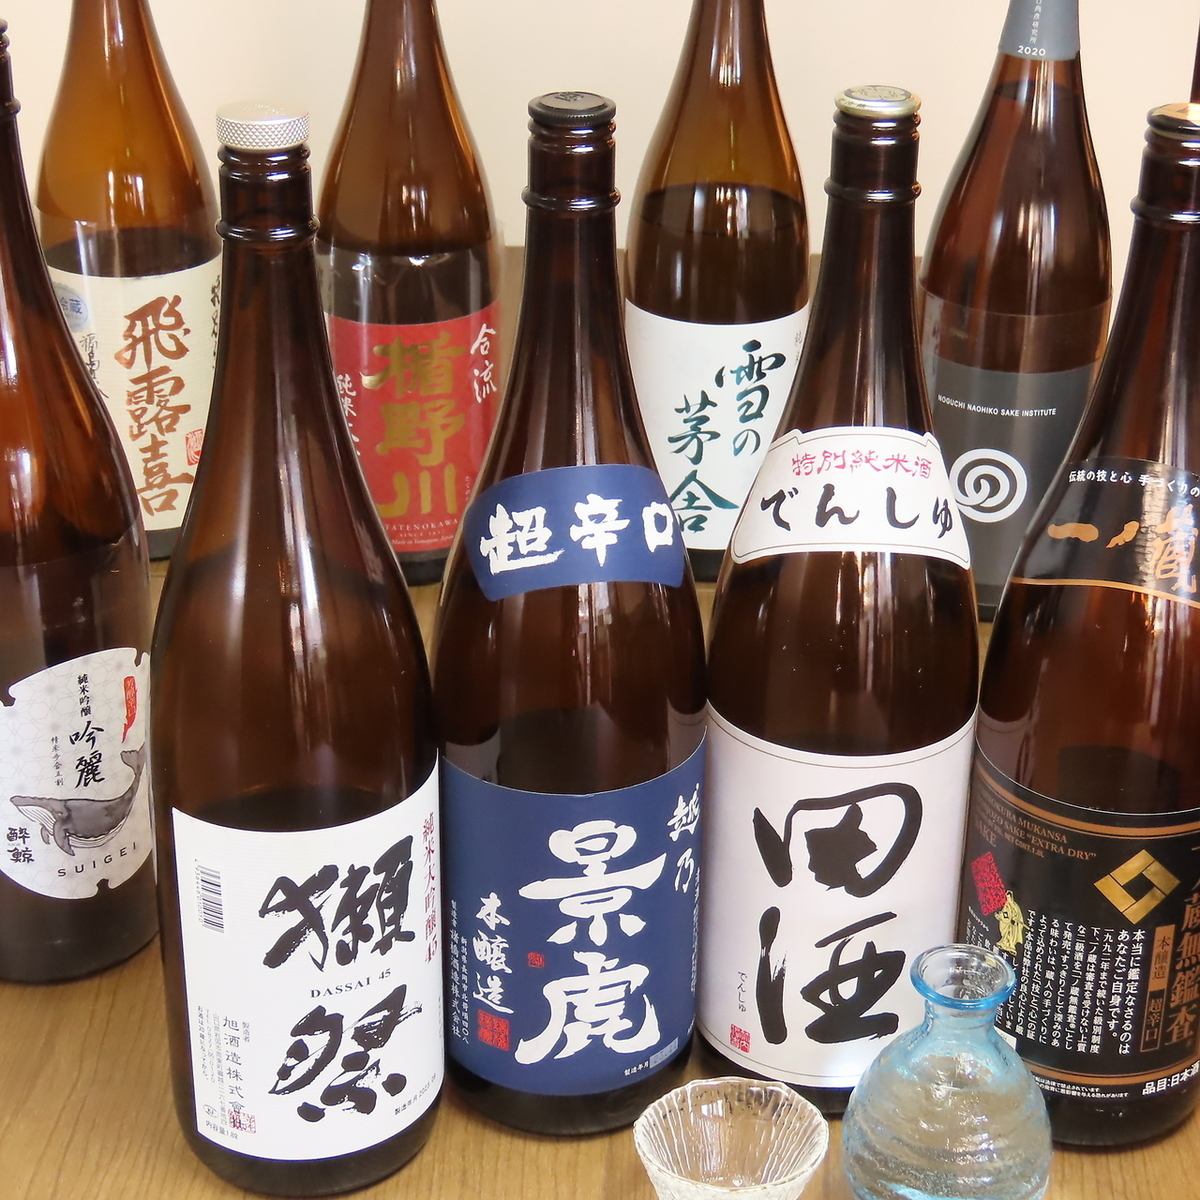 We have a wide variety of Japanese sake!